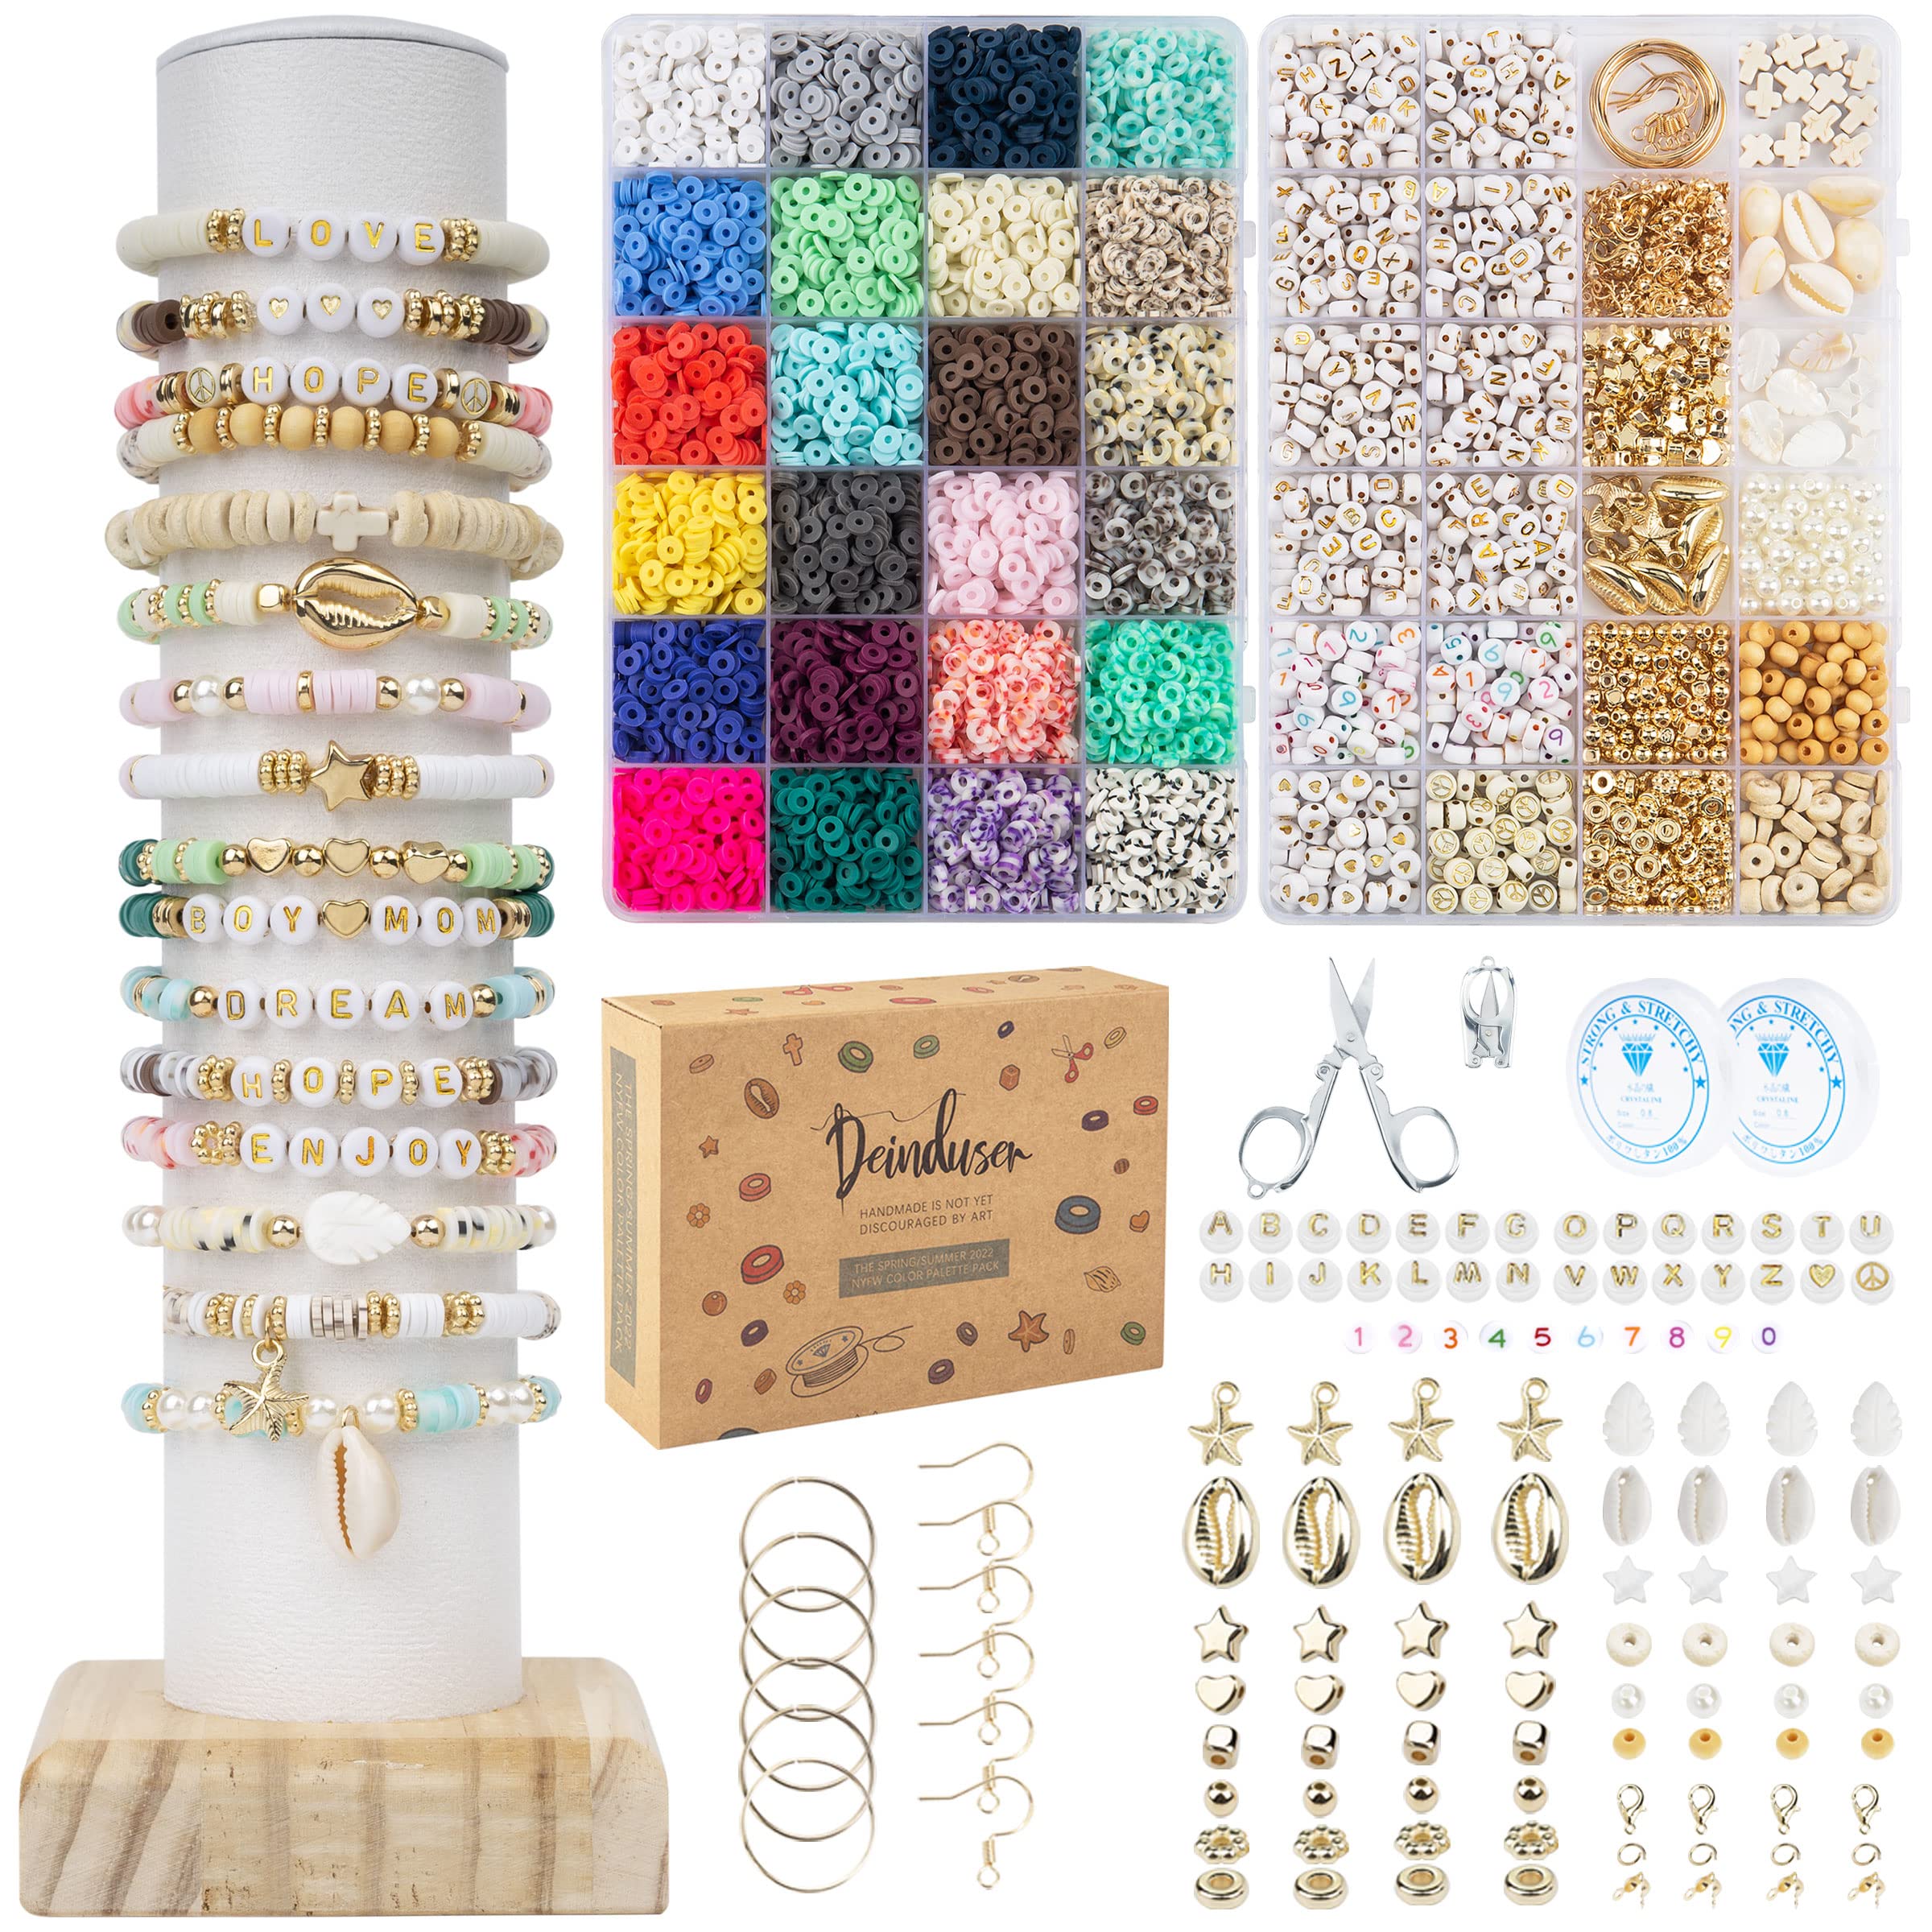 Amazon.com: Gionlion Clay Beads Bracelet Making Kit, Pack 2 Boxes Preppy  Clay Beads Letter Beads Spacer Beads and Charms Kit for Friendship Jewelry  Making, Arts and Crafts Gifts for Girls Ages 8-12 :